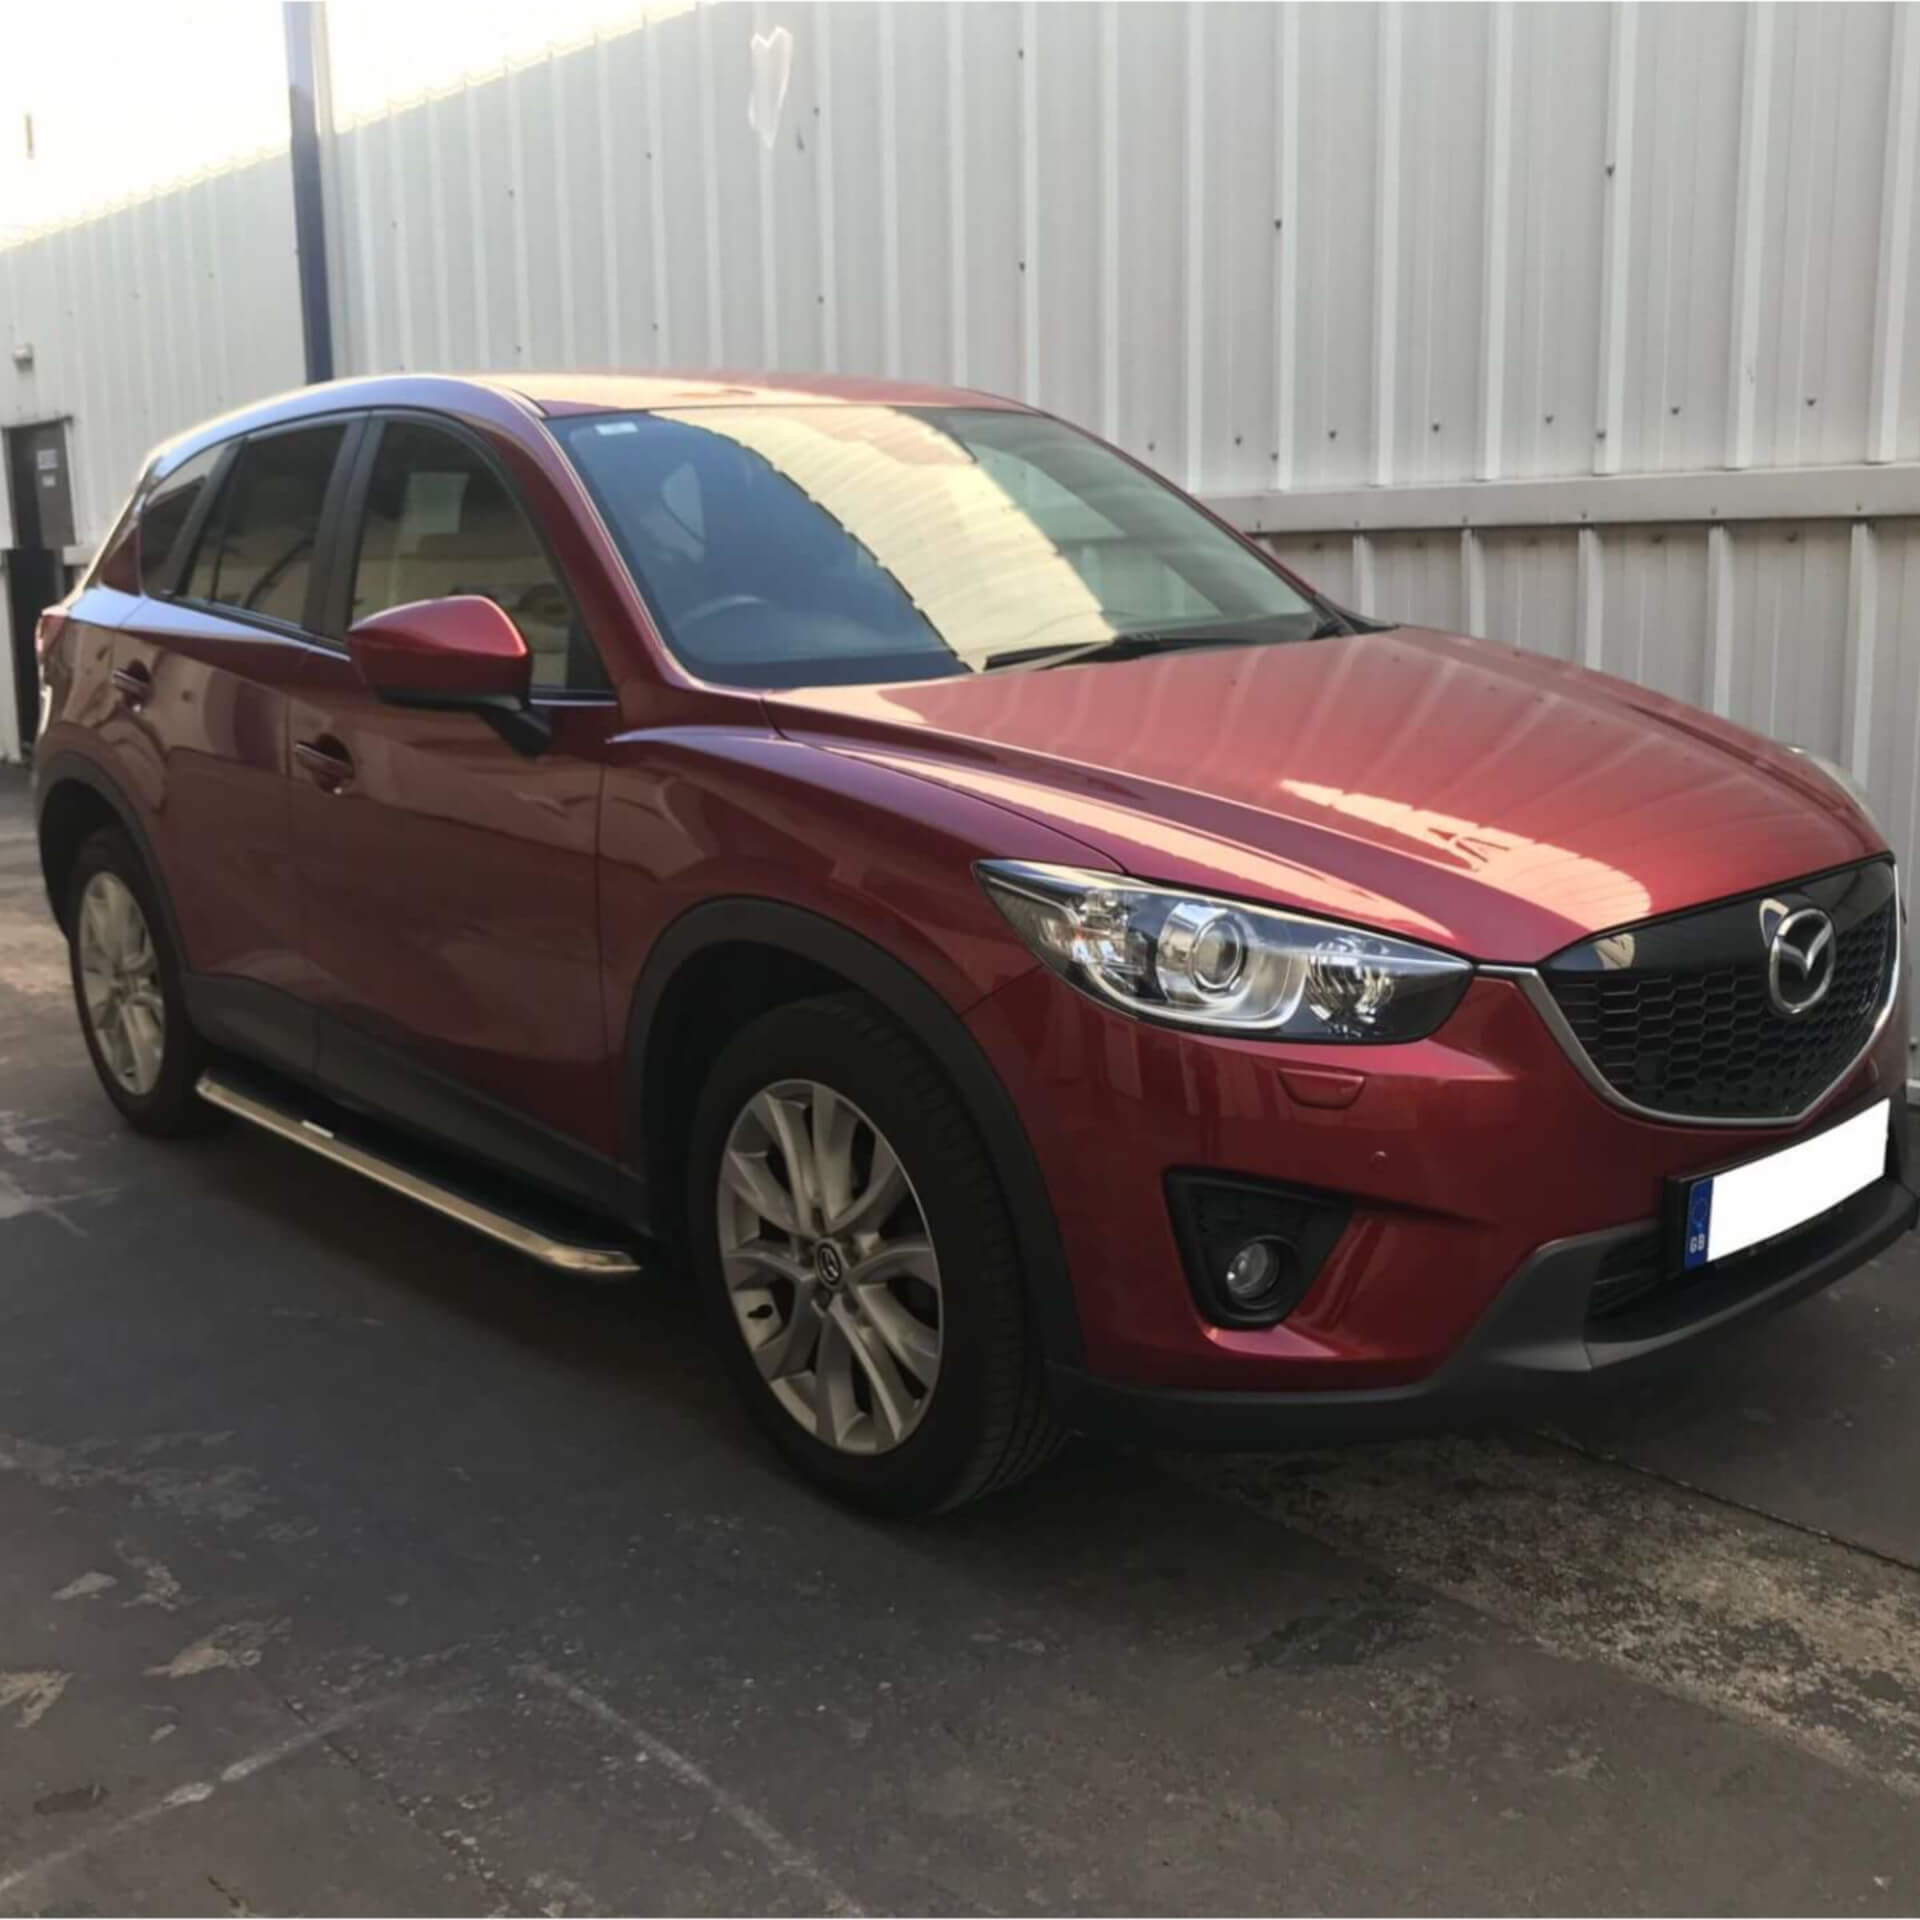 Direct4x4 accessories for Mazda CX-5 vehicles with a photo of a cherry red Mazda CX-5 at our offices fitted with High Flyer side steps